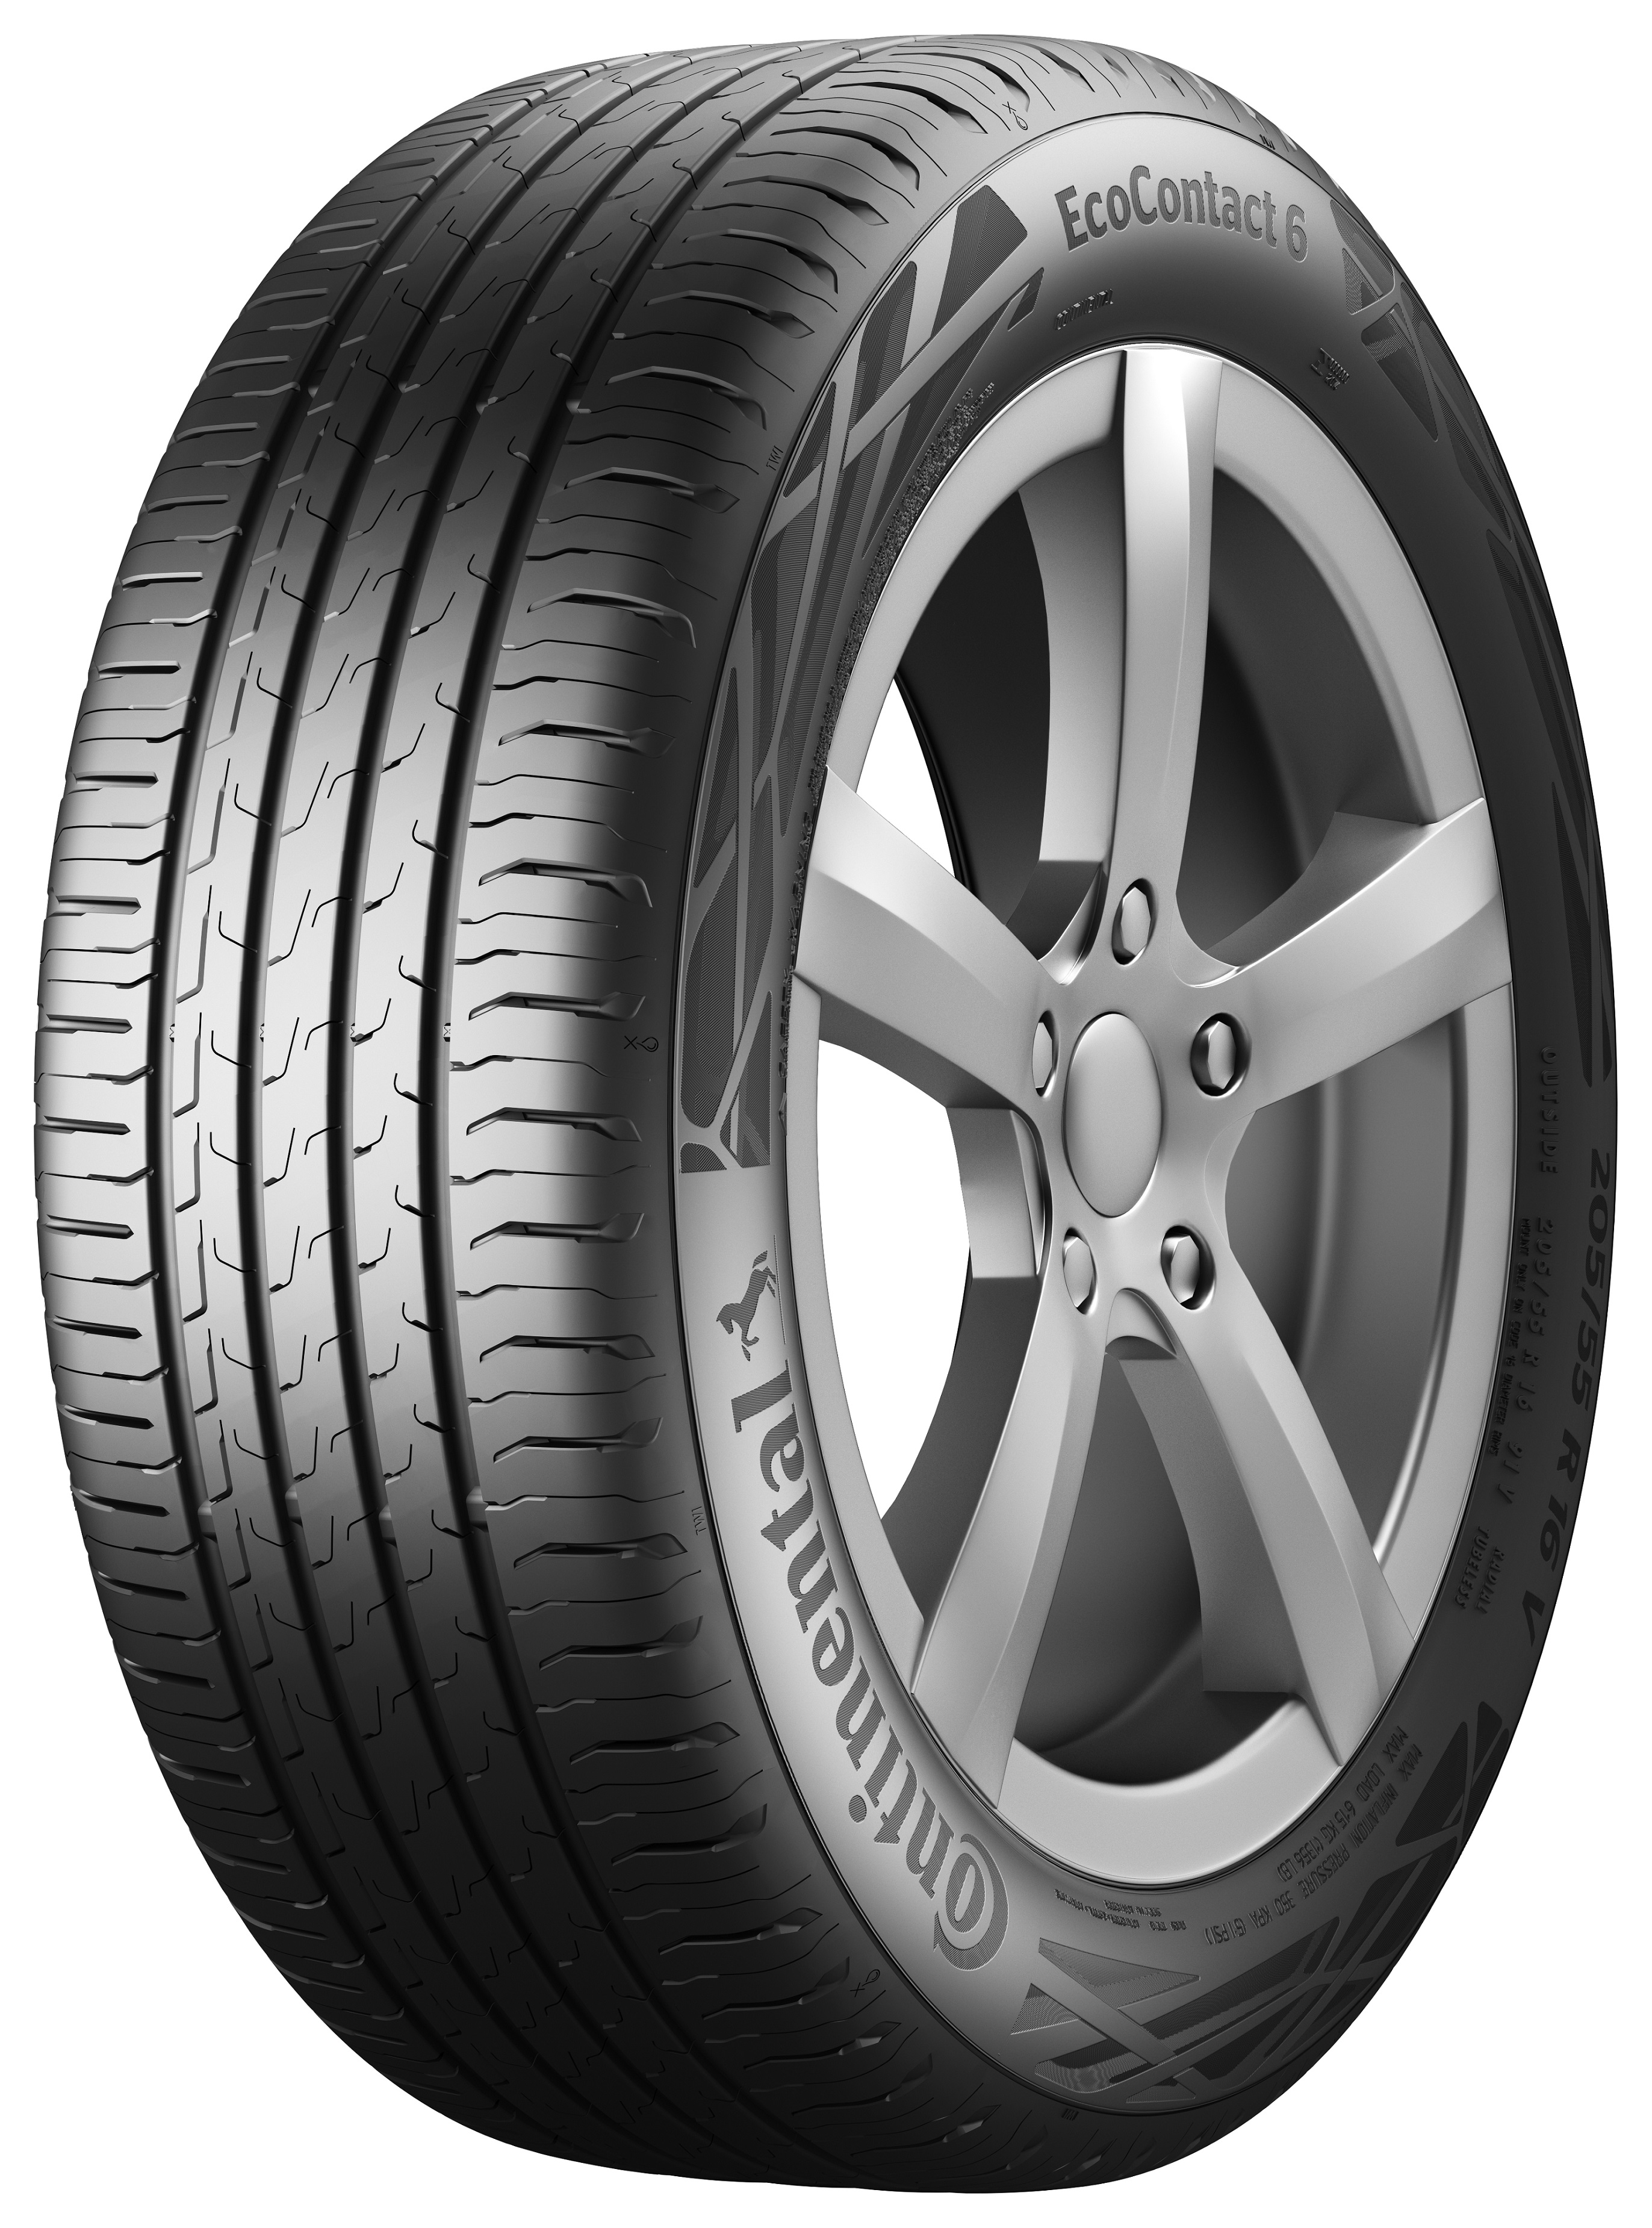 Continental ecocontact 6 отзывы. Continental ULTRACONTACT 175/65 r14 82t. Continental CONTIECOCONTACT 6. Continental ECOCONTACT 6 235 55 r18 100v. Шины Continental ECOCONTACT 6.